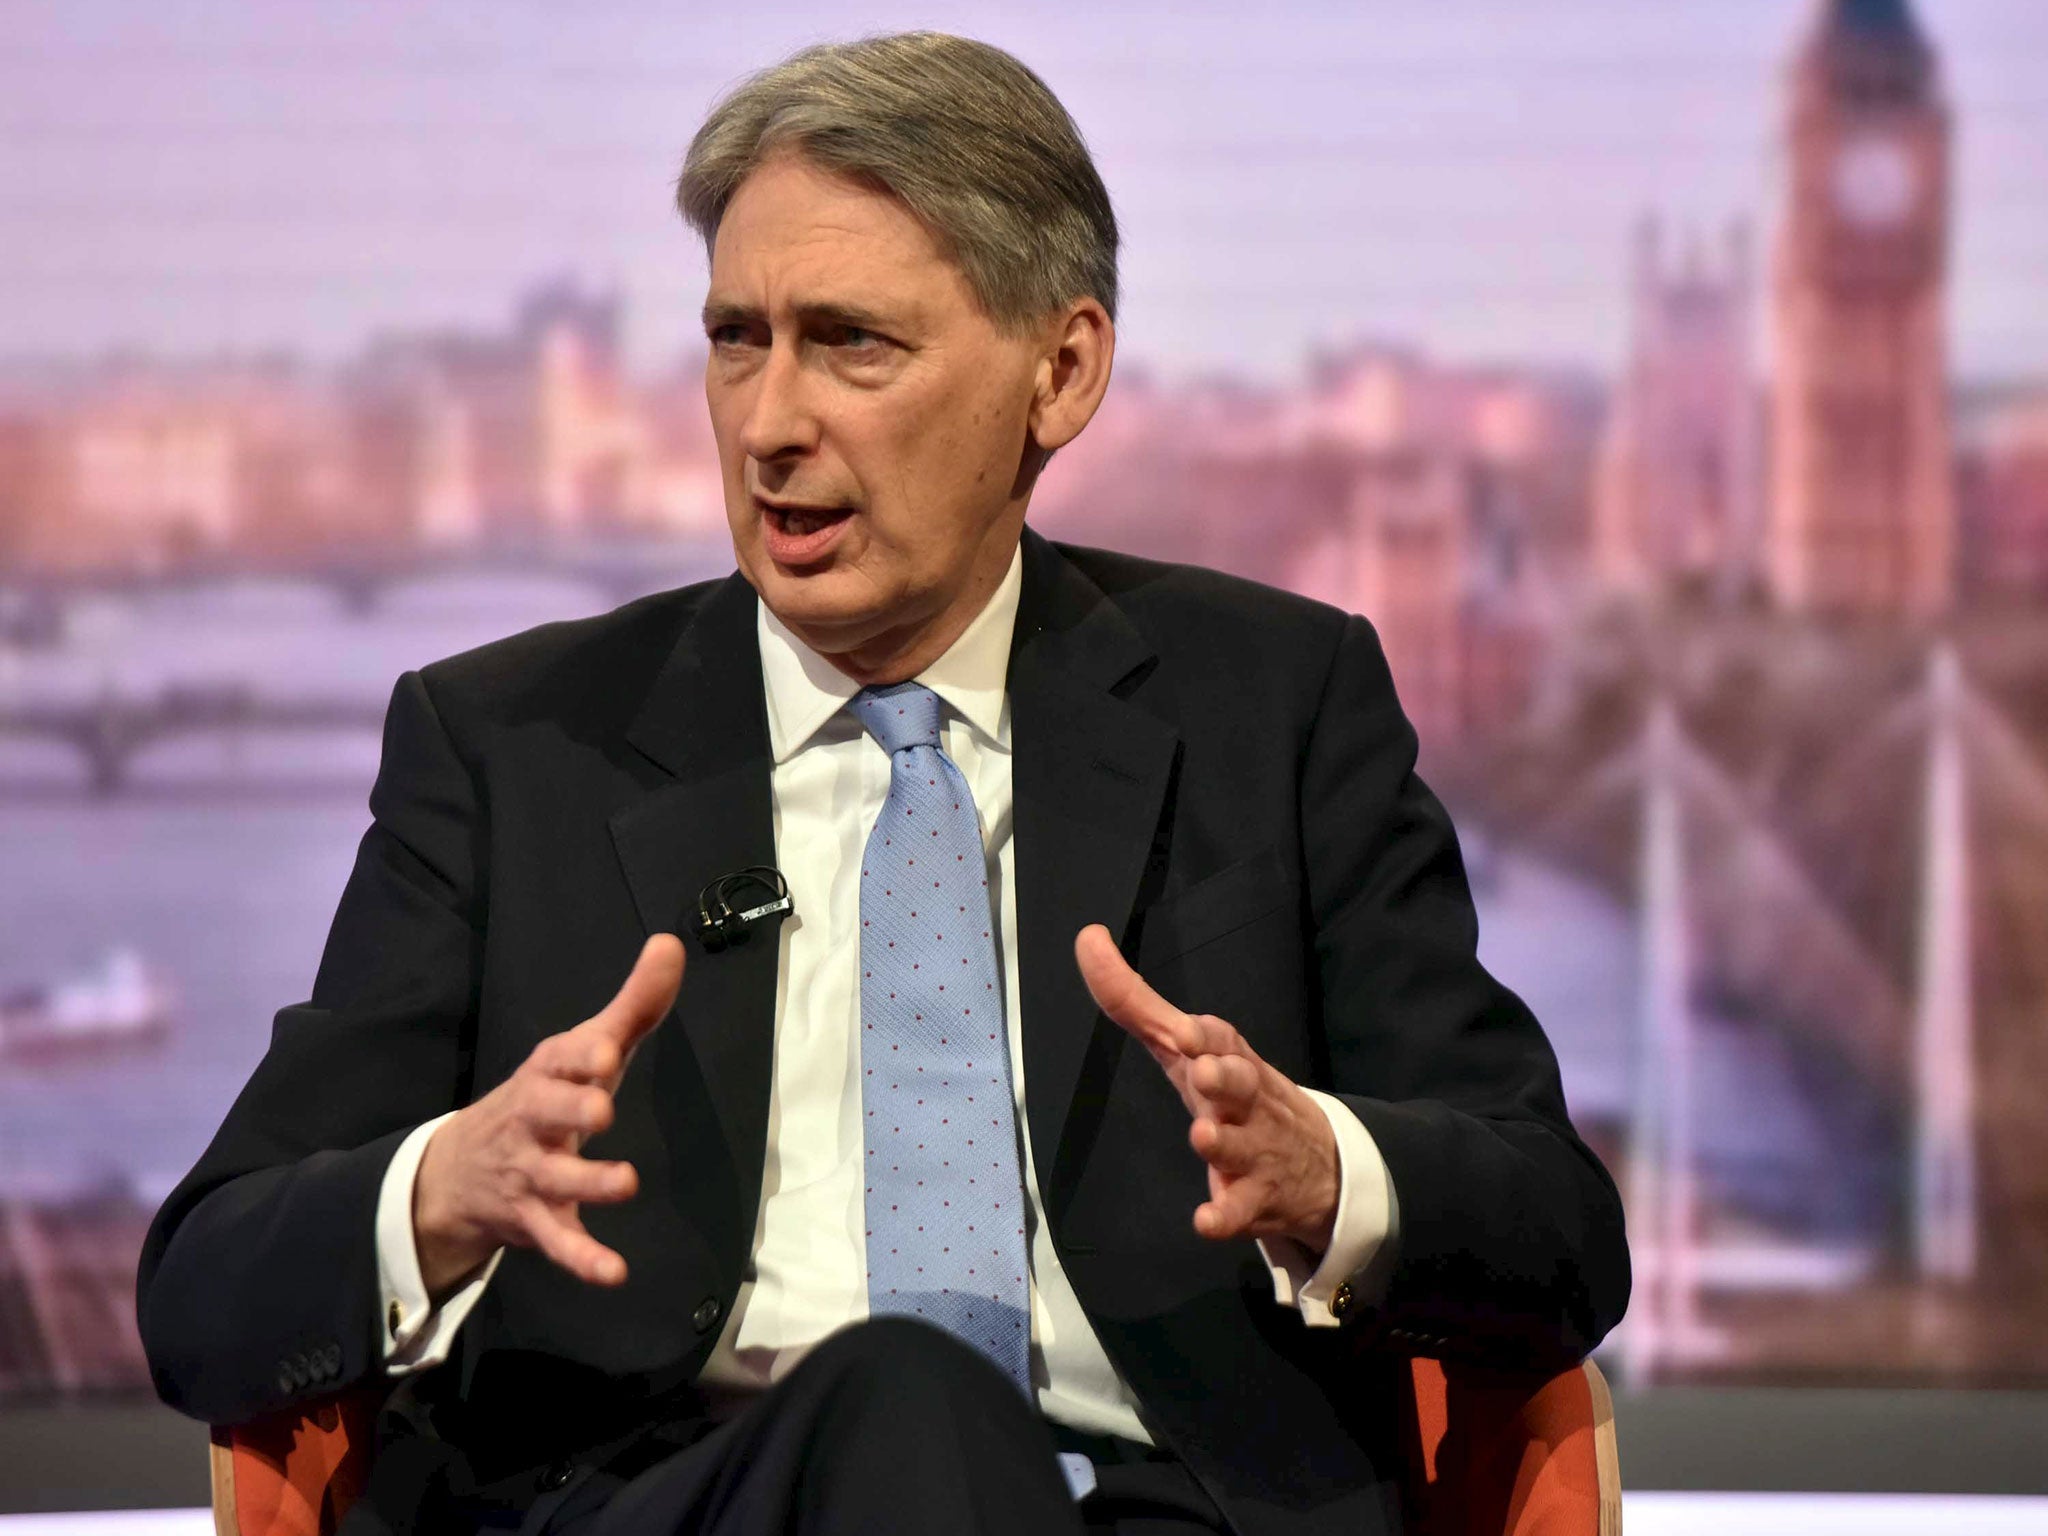 Philip Hammond, the foreign secretary, warned that if Britain votes to leave the EU “the mood of goodwill towards Britain will evaporate in an instant”